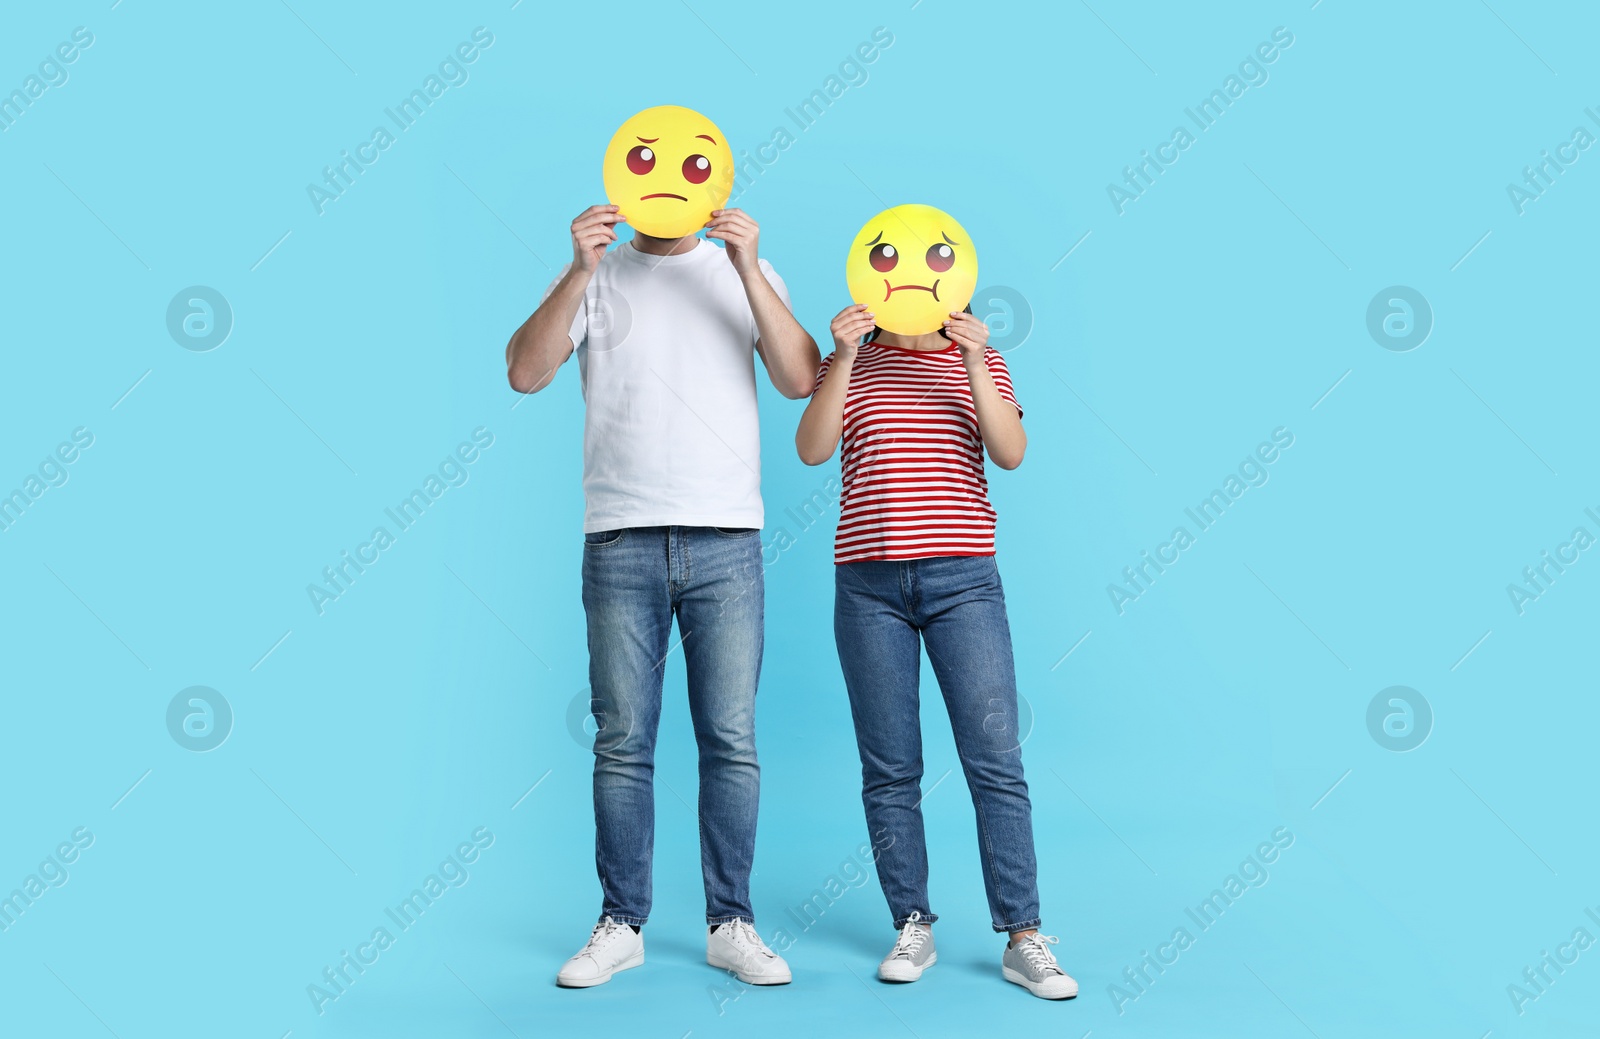 Photo of People covering faces with emoticons on light blue background